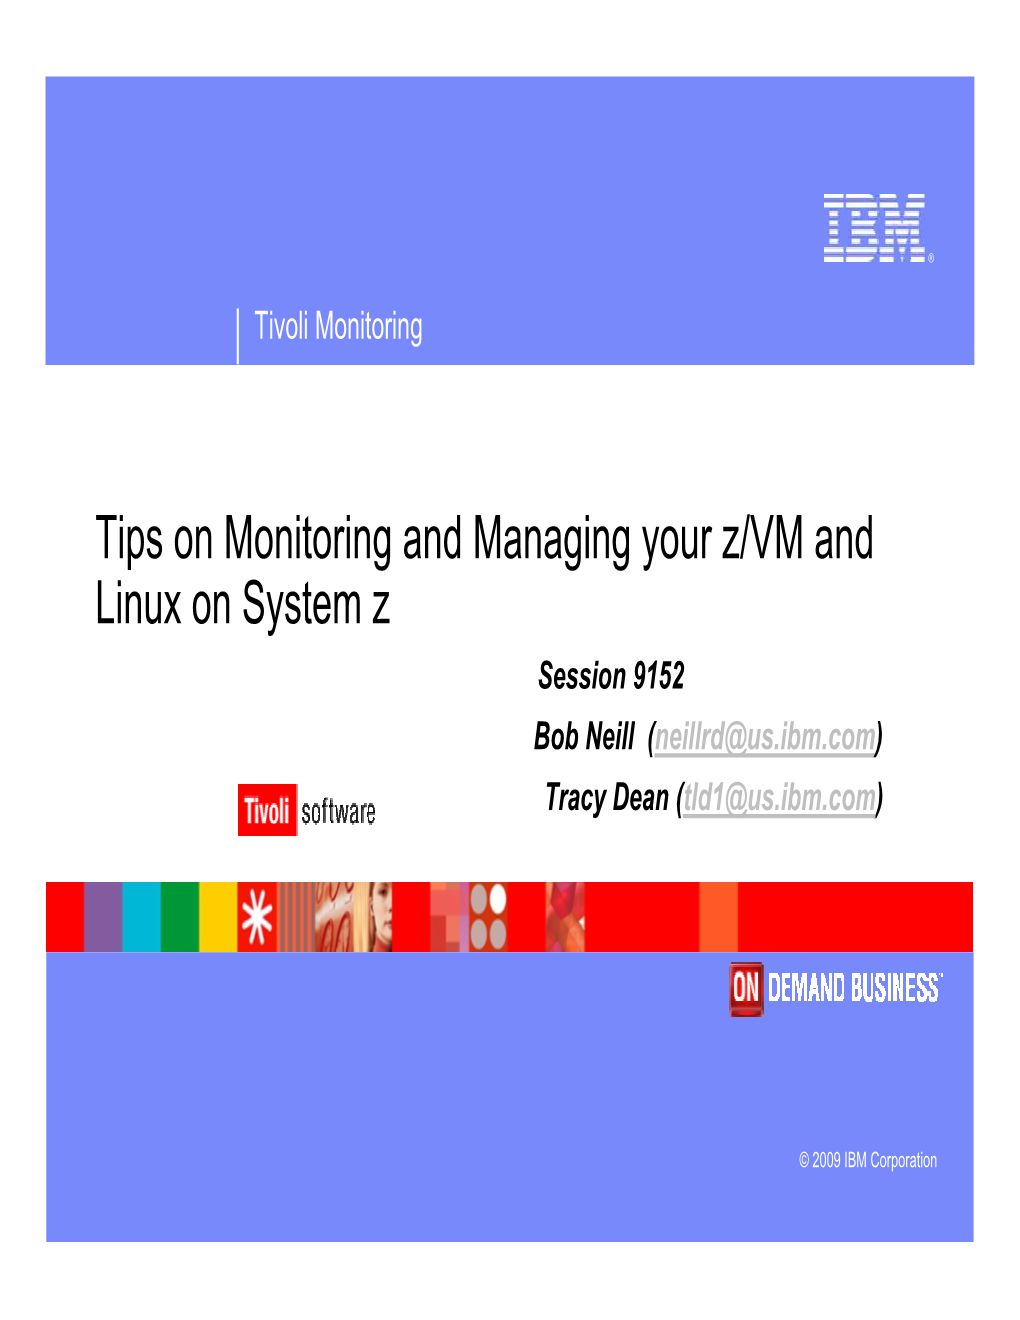 Tips on Monitoring and Managing Your Z/VM and Linux on System Z Session 9152 Bob Neill (Neillrd@Us.Ibm.Com) Tracy Dean (Tld1@Us.Ibm.Com)